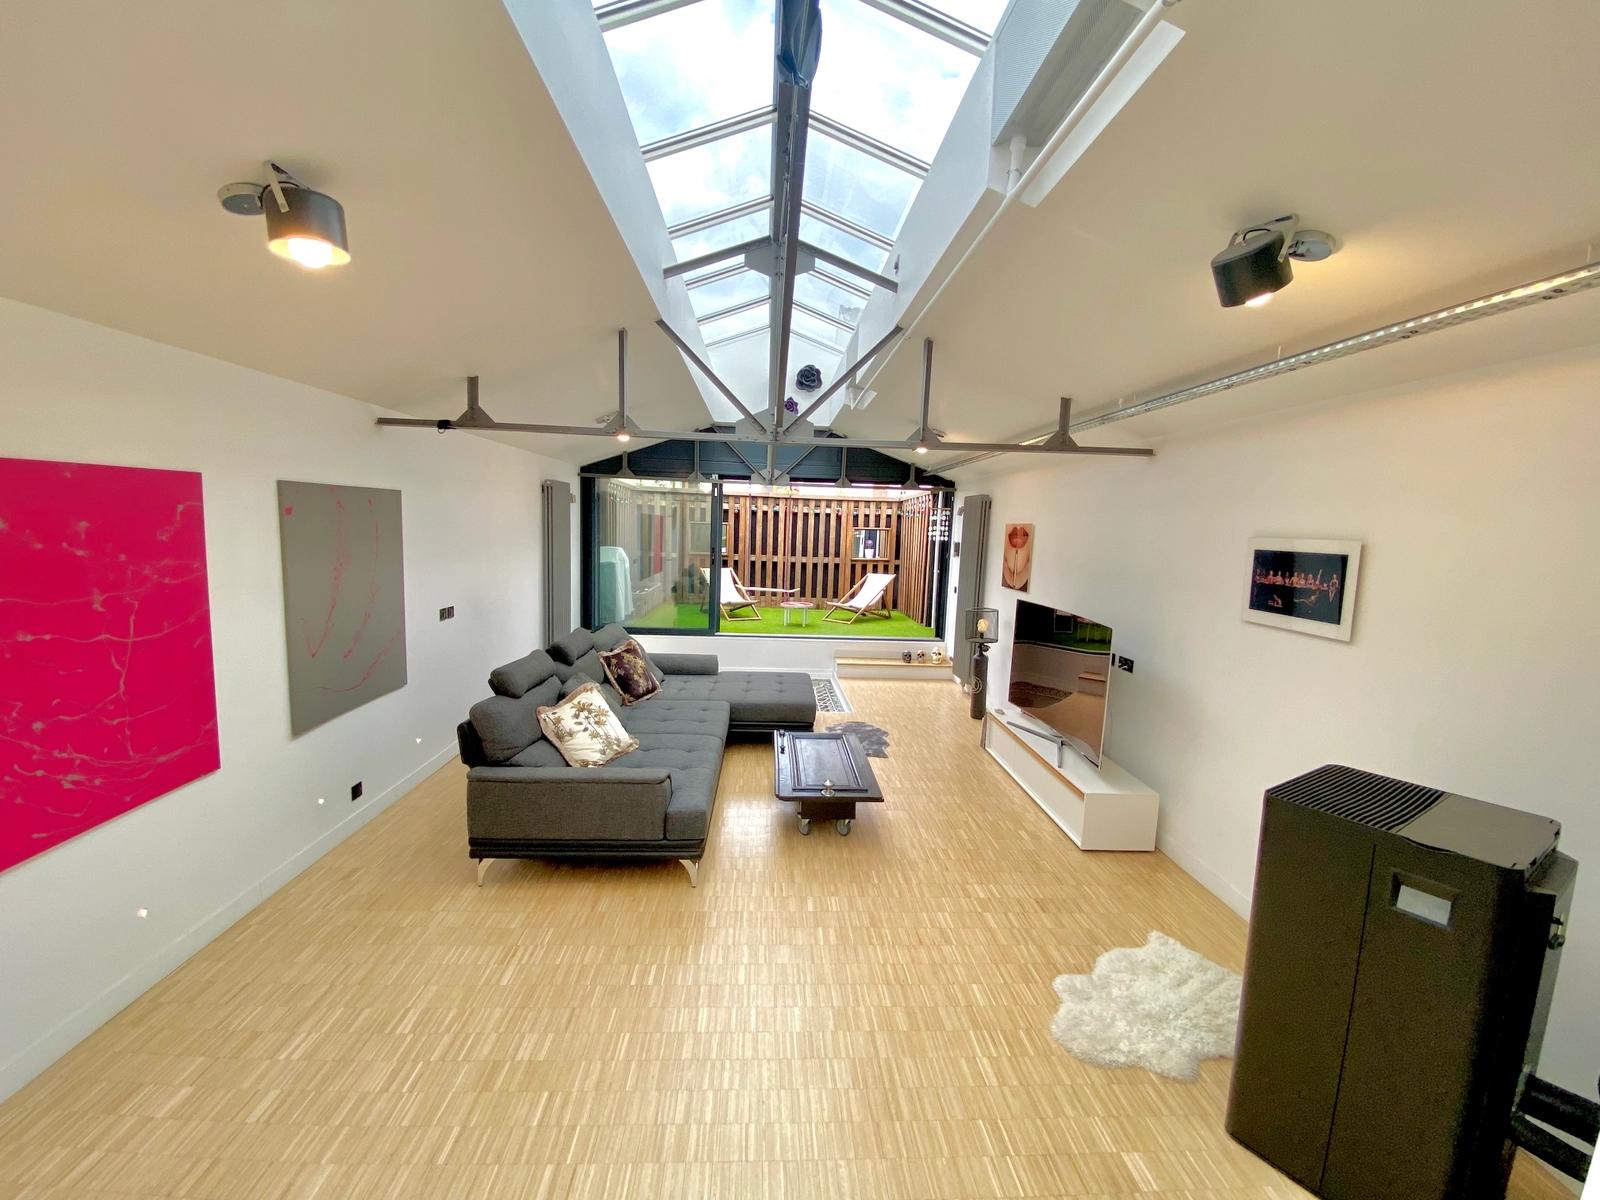 Living room in Loft house with glass roof - 0